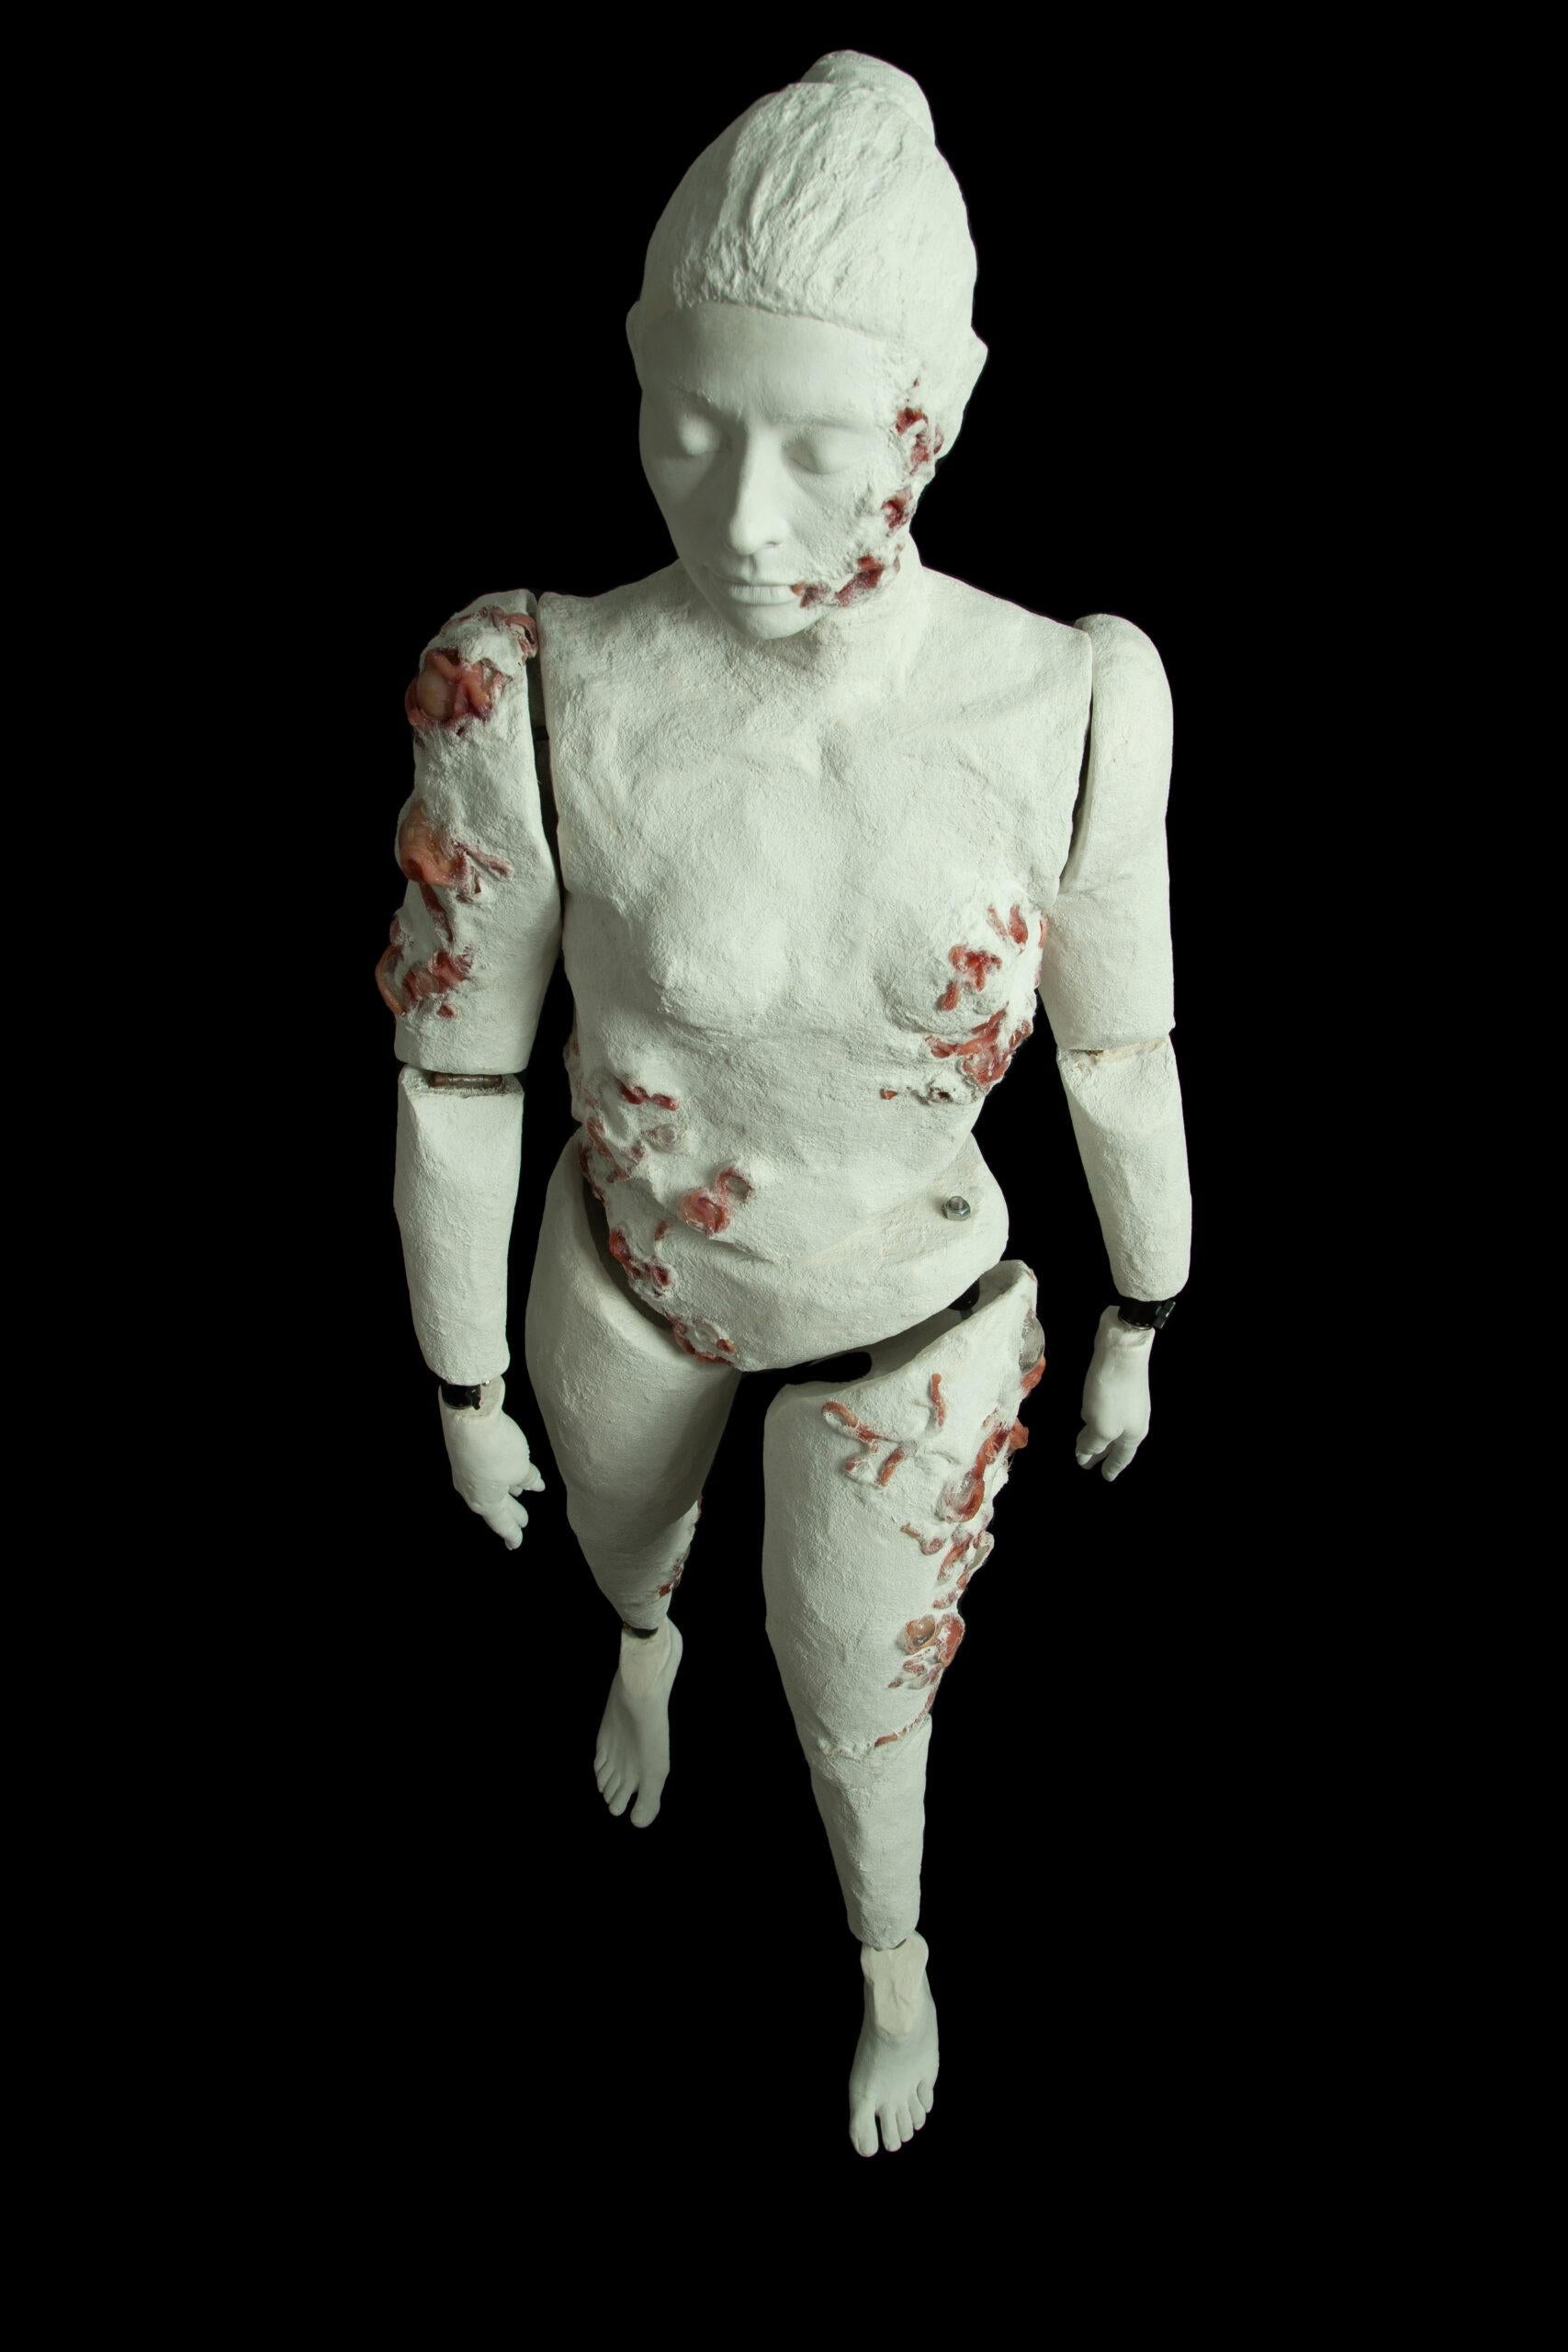 Unknown Figurative Sculpture - THE BATTLE WITHIN: A Representation of Insecurities due to Female Body Standards